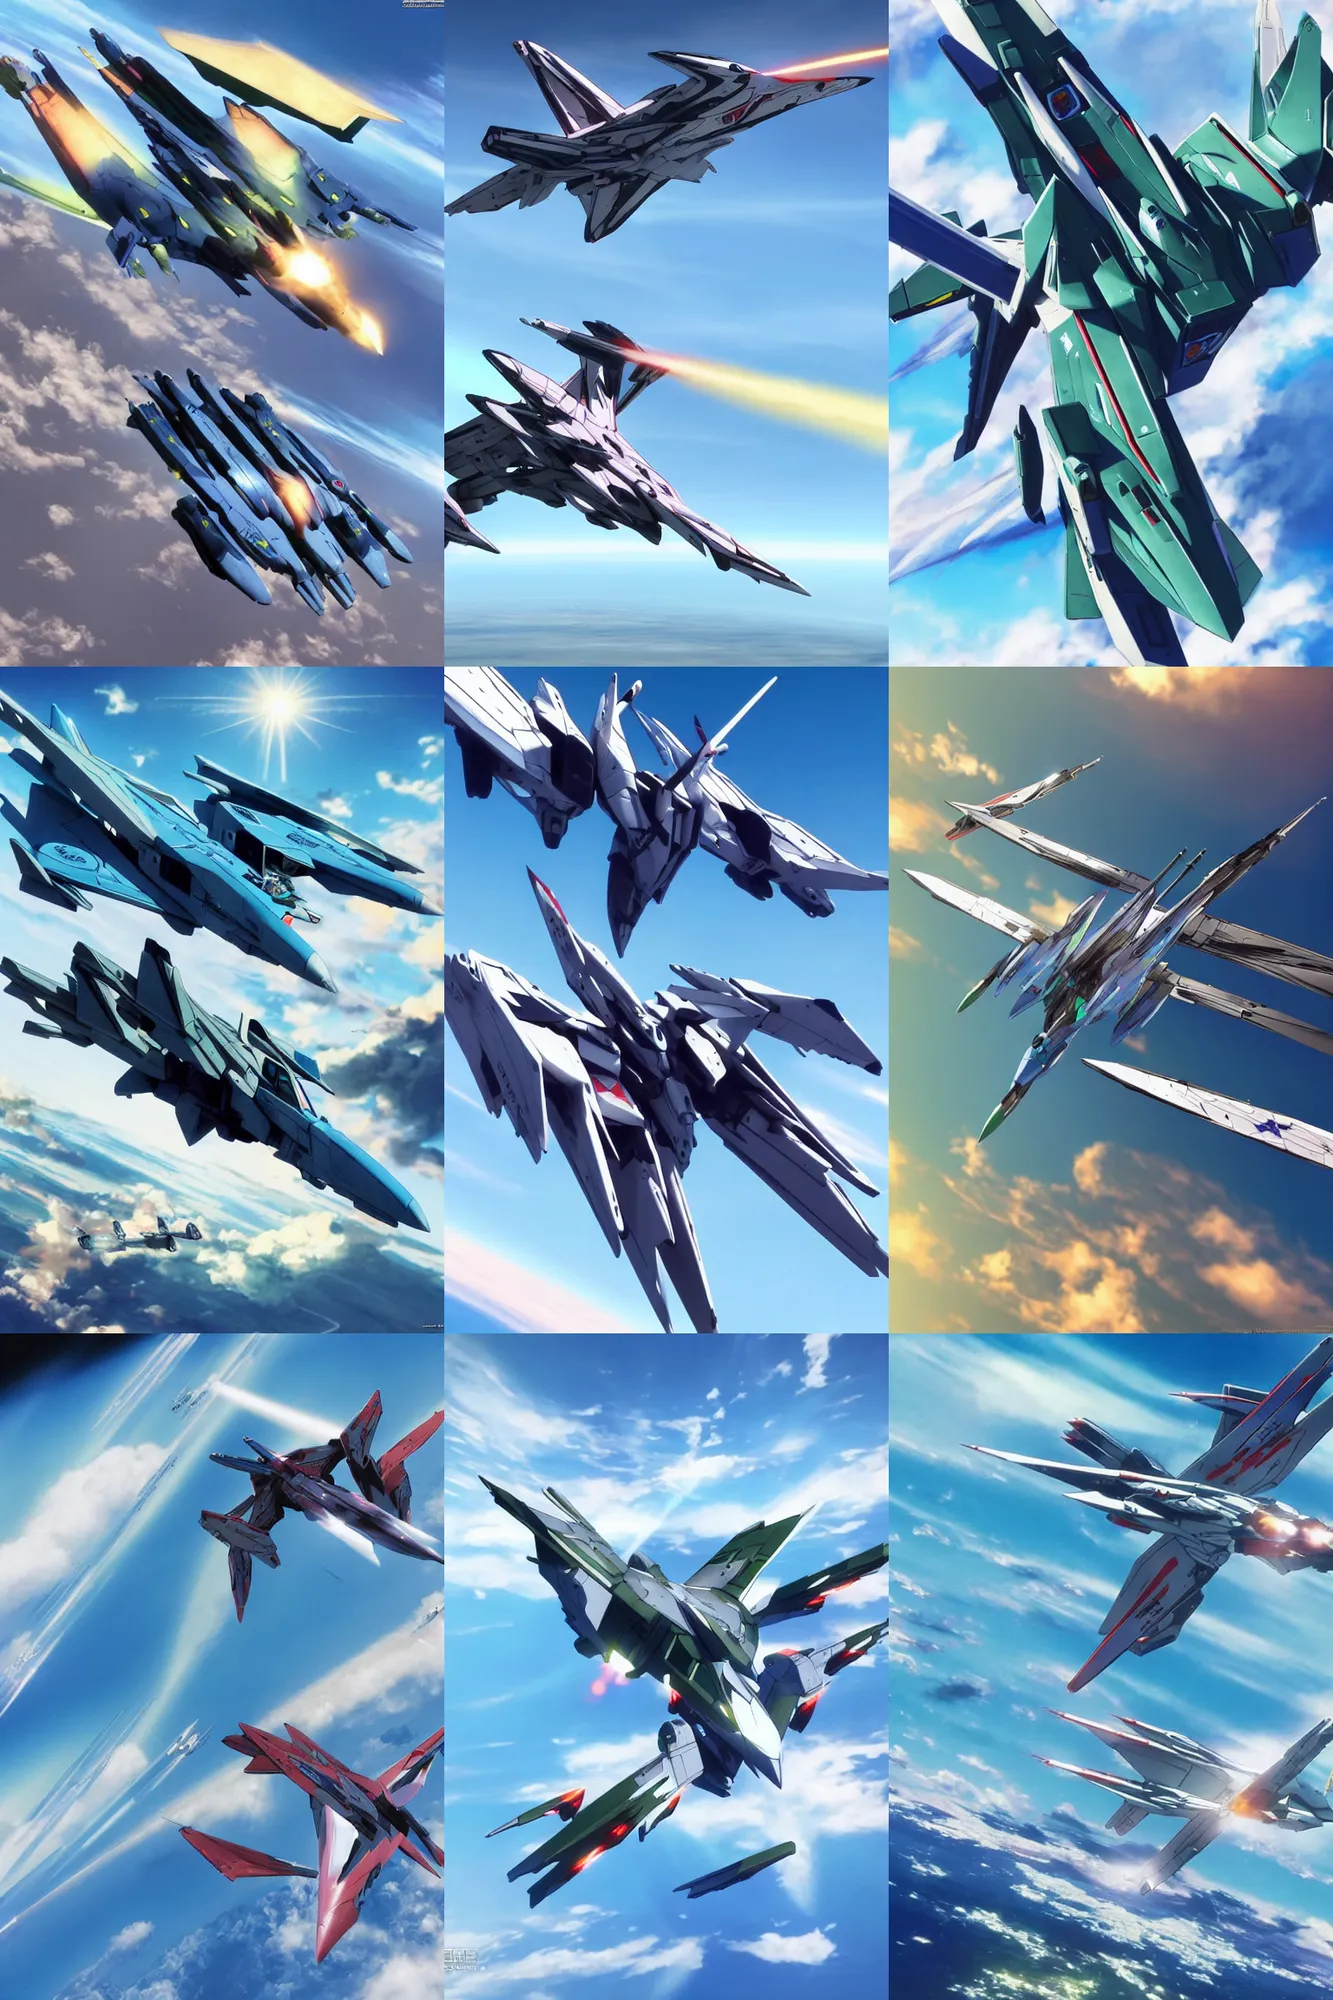 Prompt: An awe inspiring flight shot of a VF25 Messiah in Fighter Mode from Macross Frontier soaring through the air on a sunny day with a clear blue sky, anime, Macross Franchise, Macross Frontier, Valkyrie Fighter Jet, sci-fi anime, 3D CGI, mecha anime, mecha